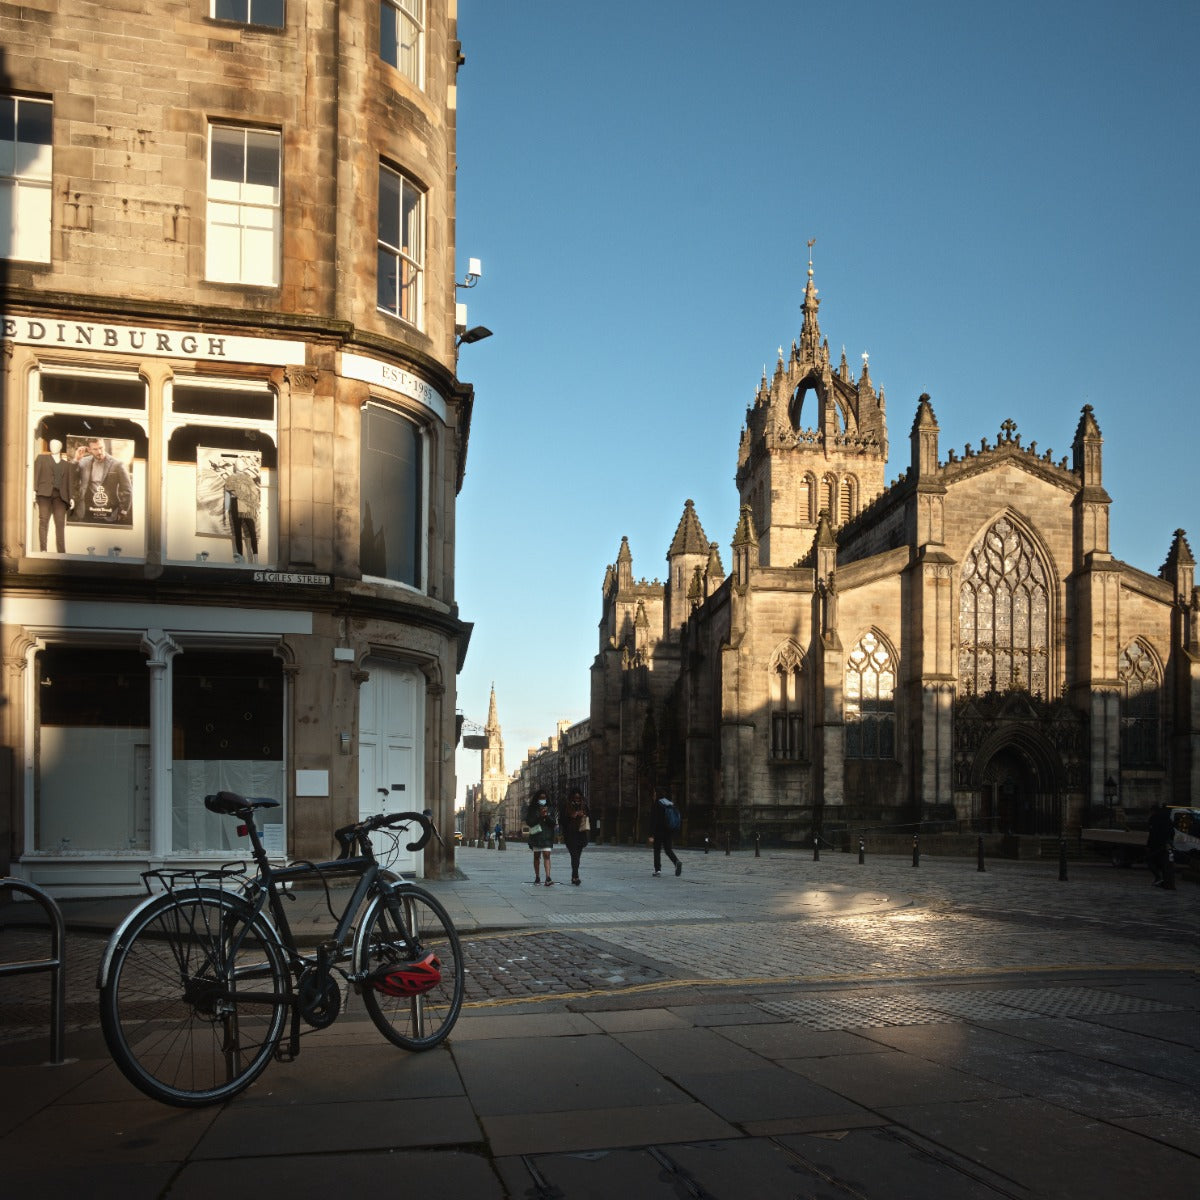 St Giles' Street and cathedral on the Royal Mile